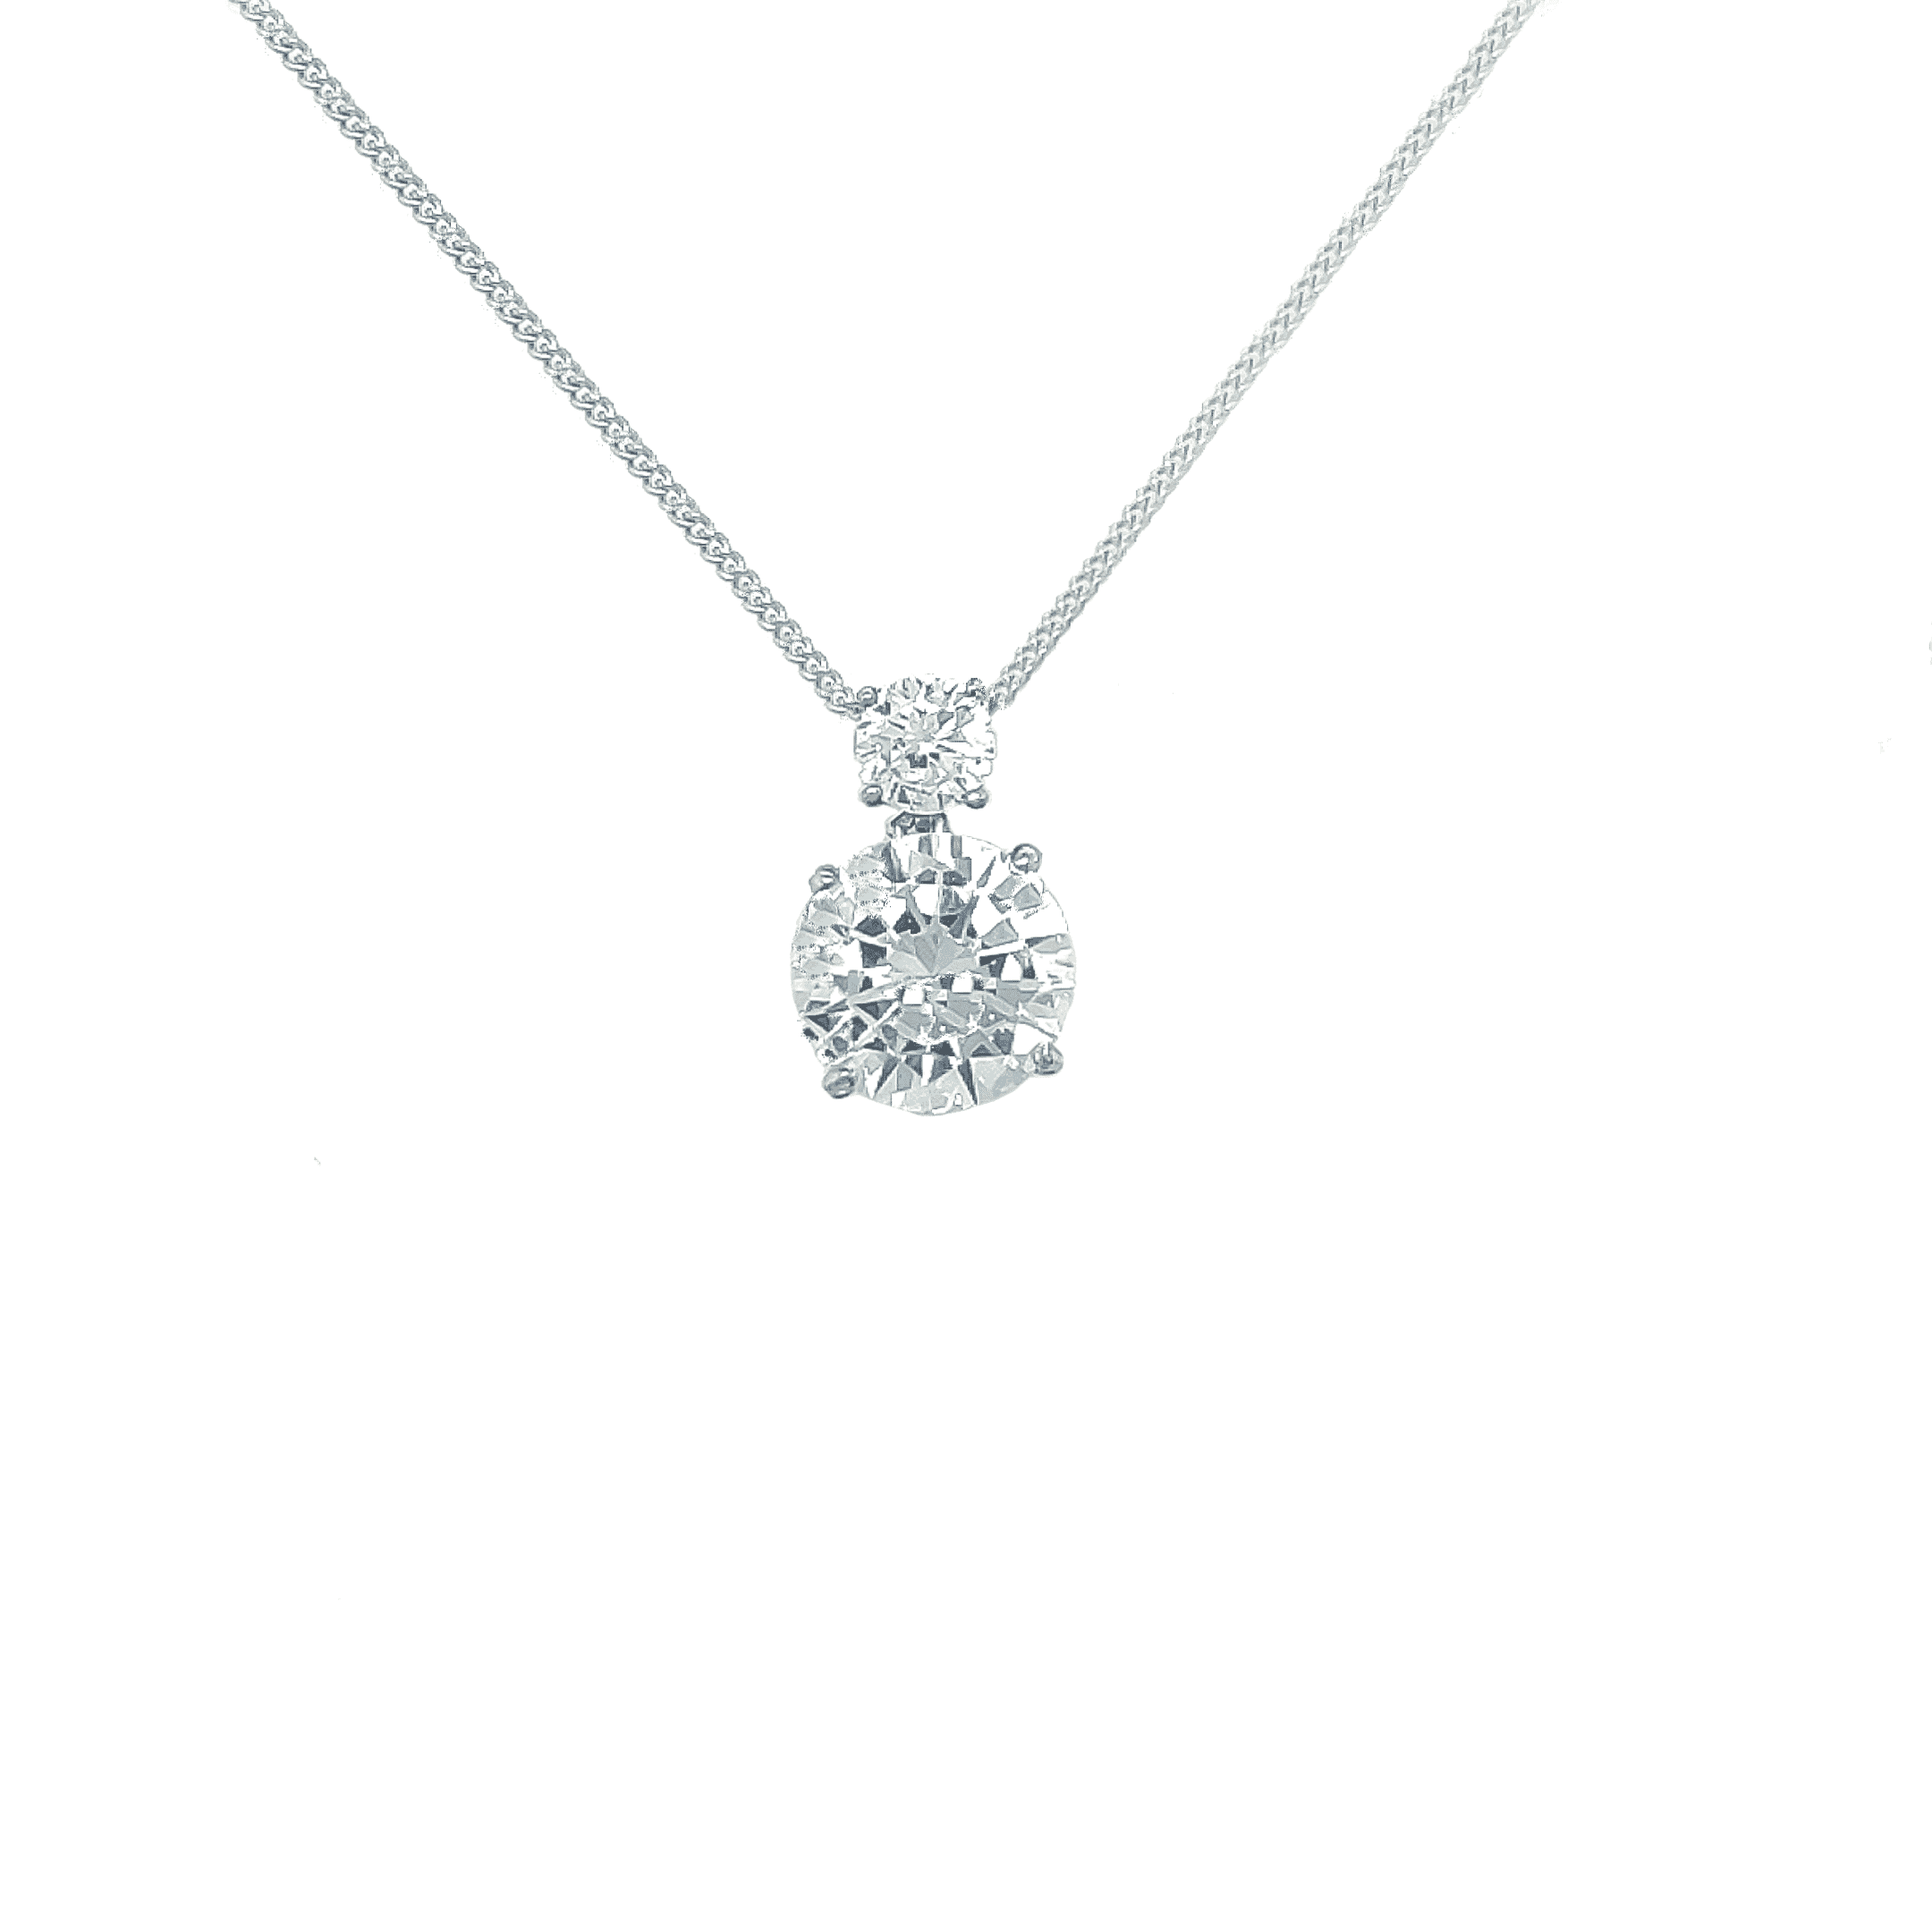 Asfour 925 Sterling Silver Necklace - NR0171